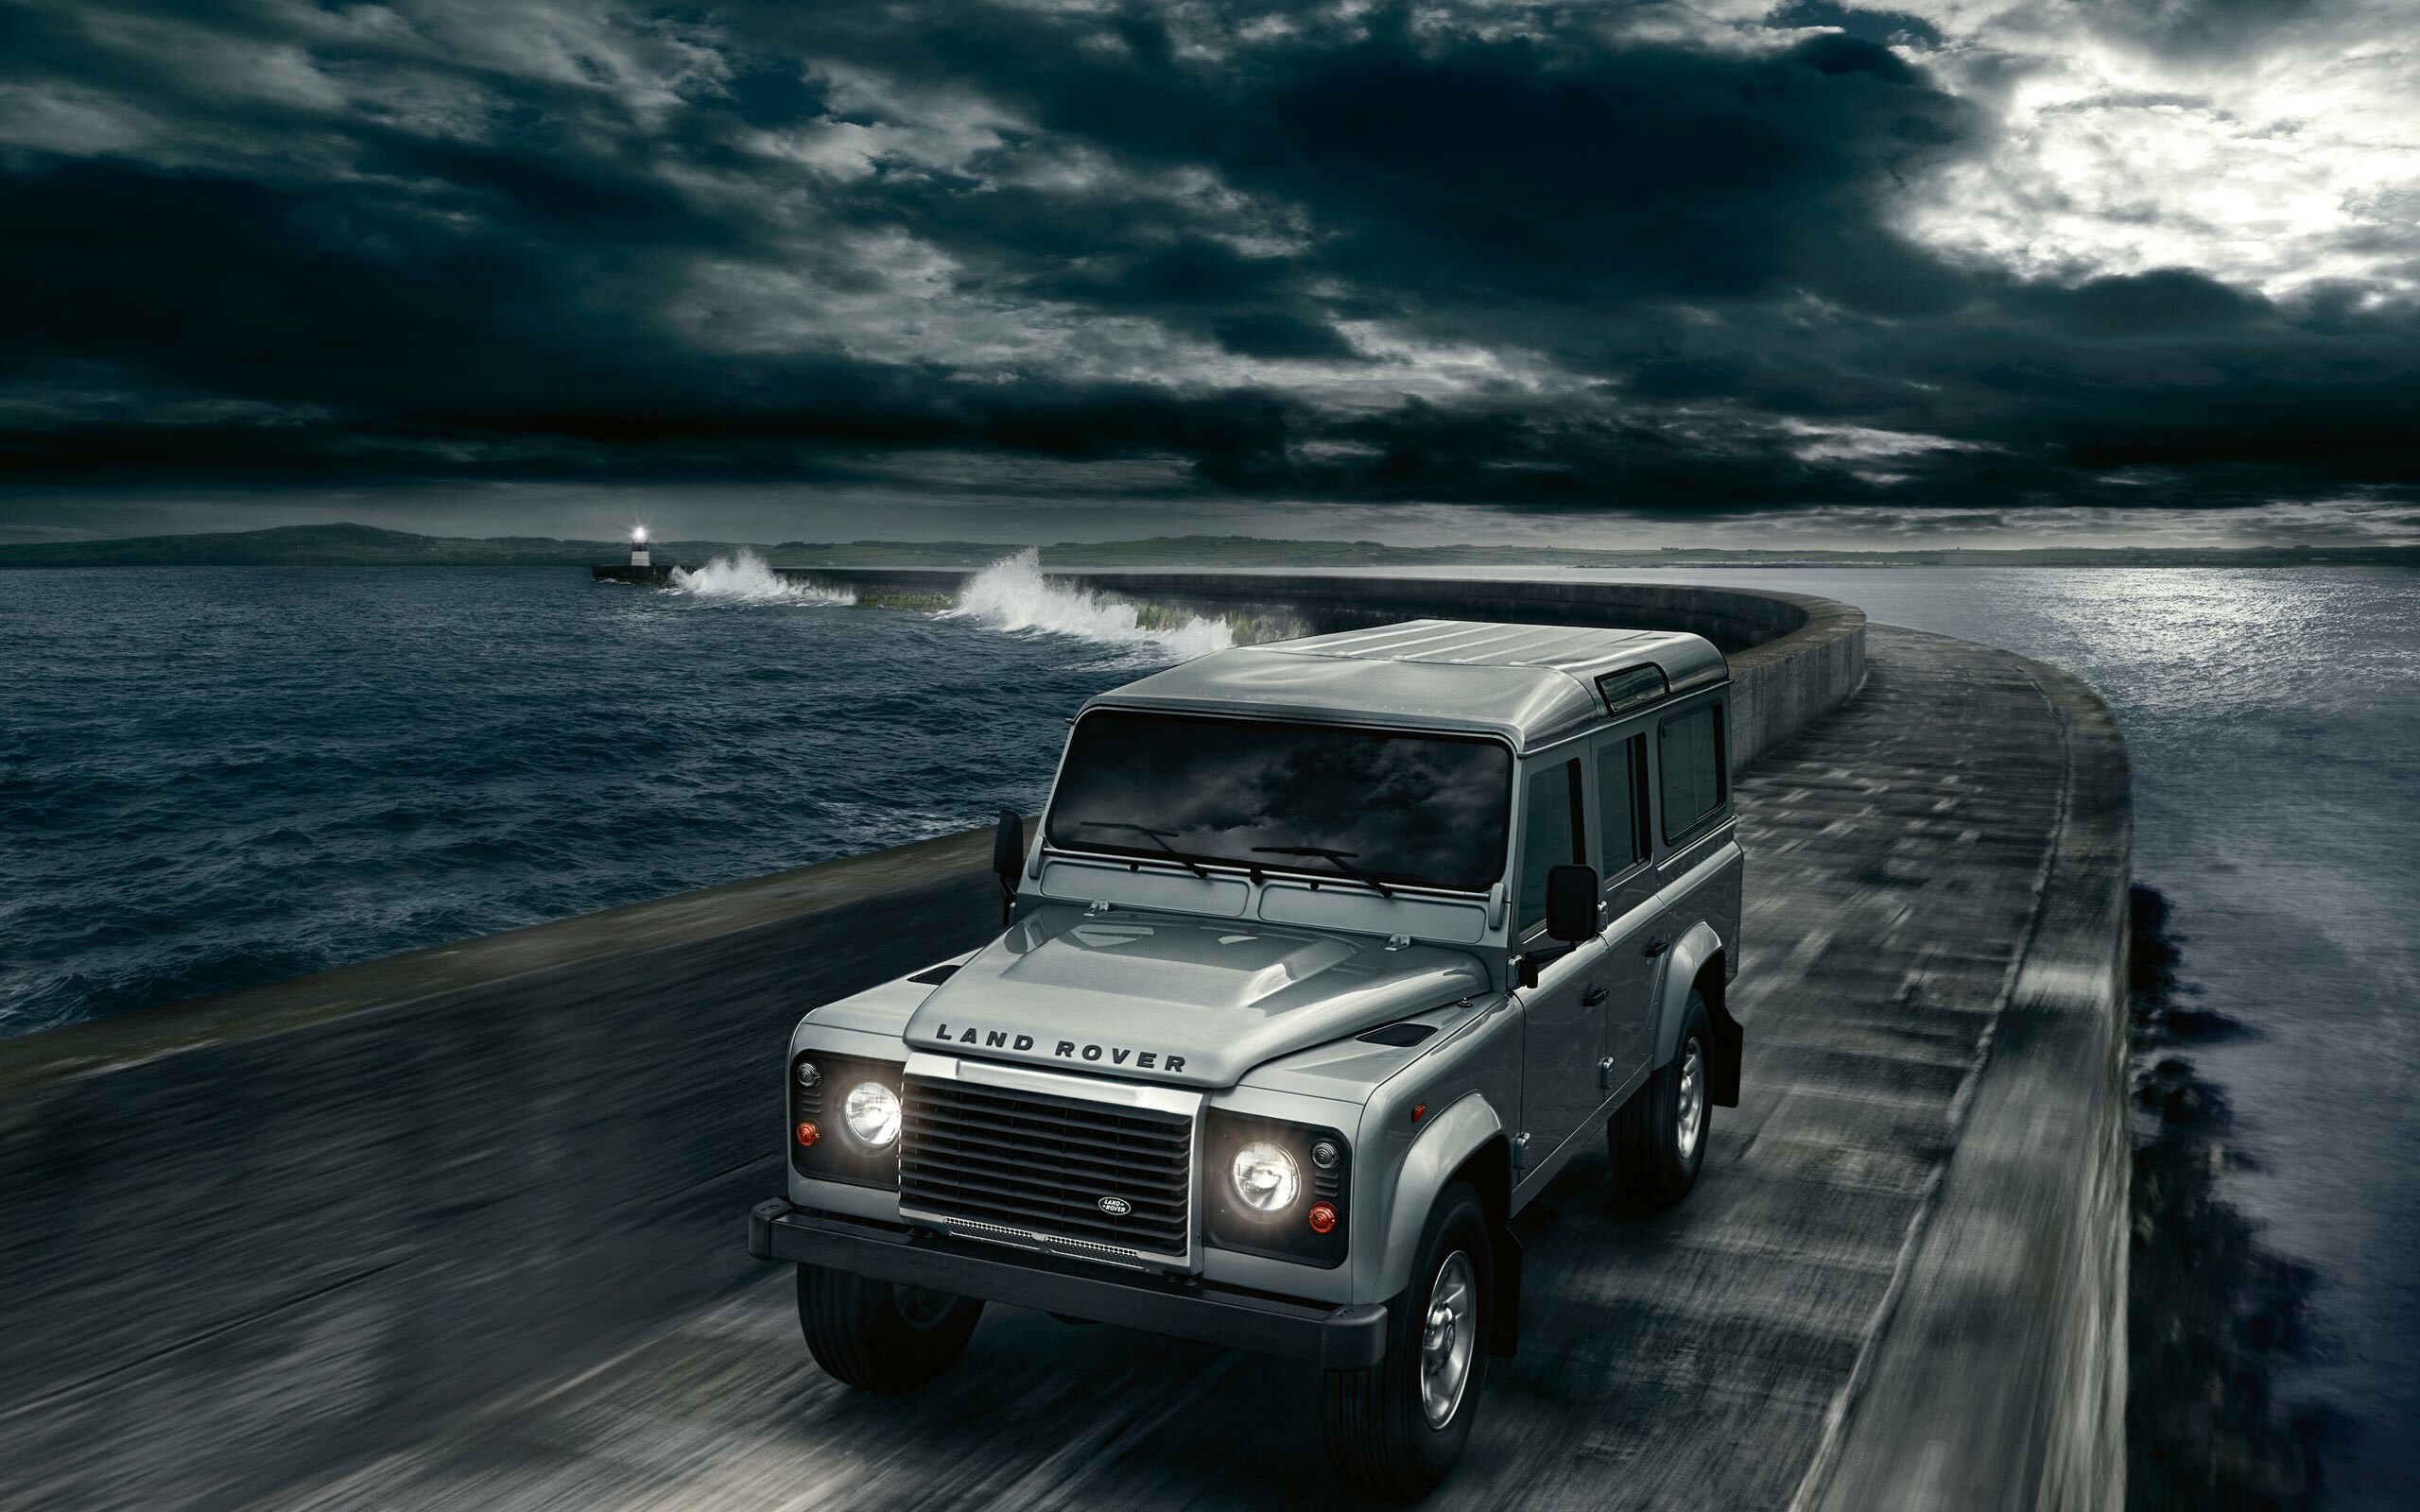 Land Rover: The company received a Queen's Award for Enterprise for outstanding contribution to international trade, in 2001. 2560x1600 HD Wallpaper.